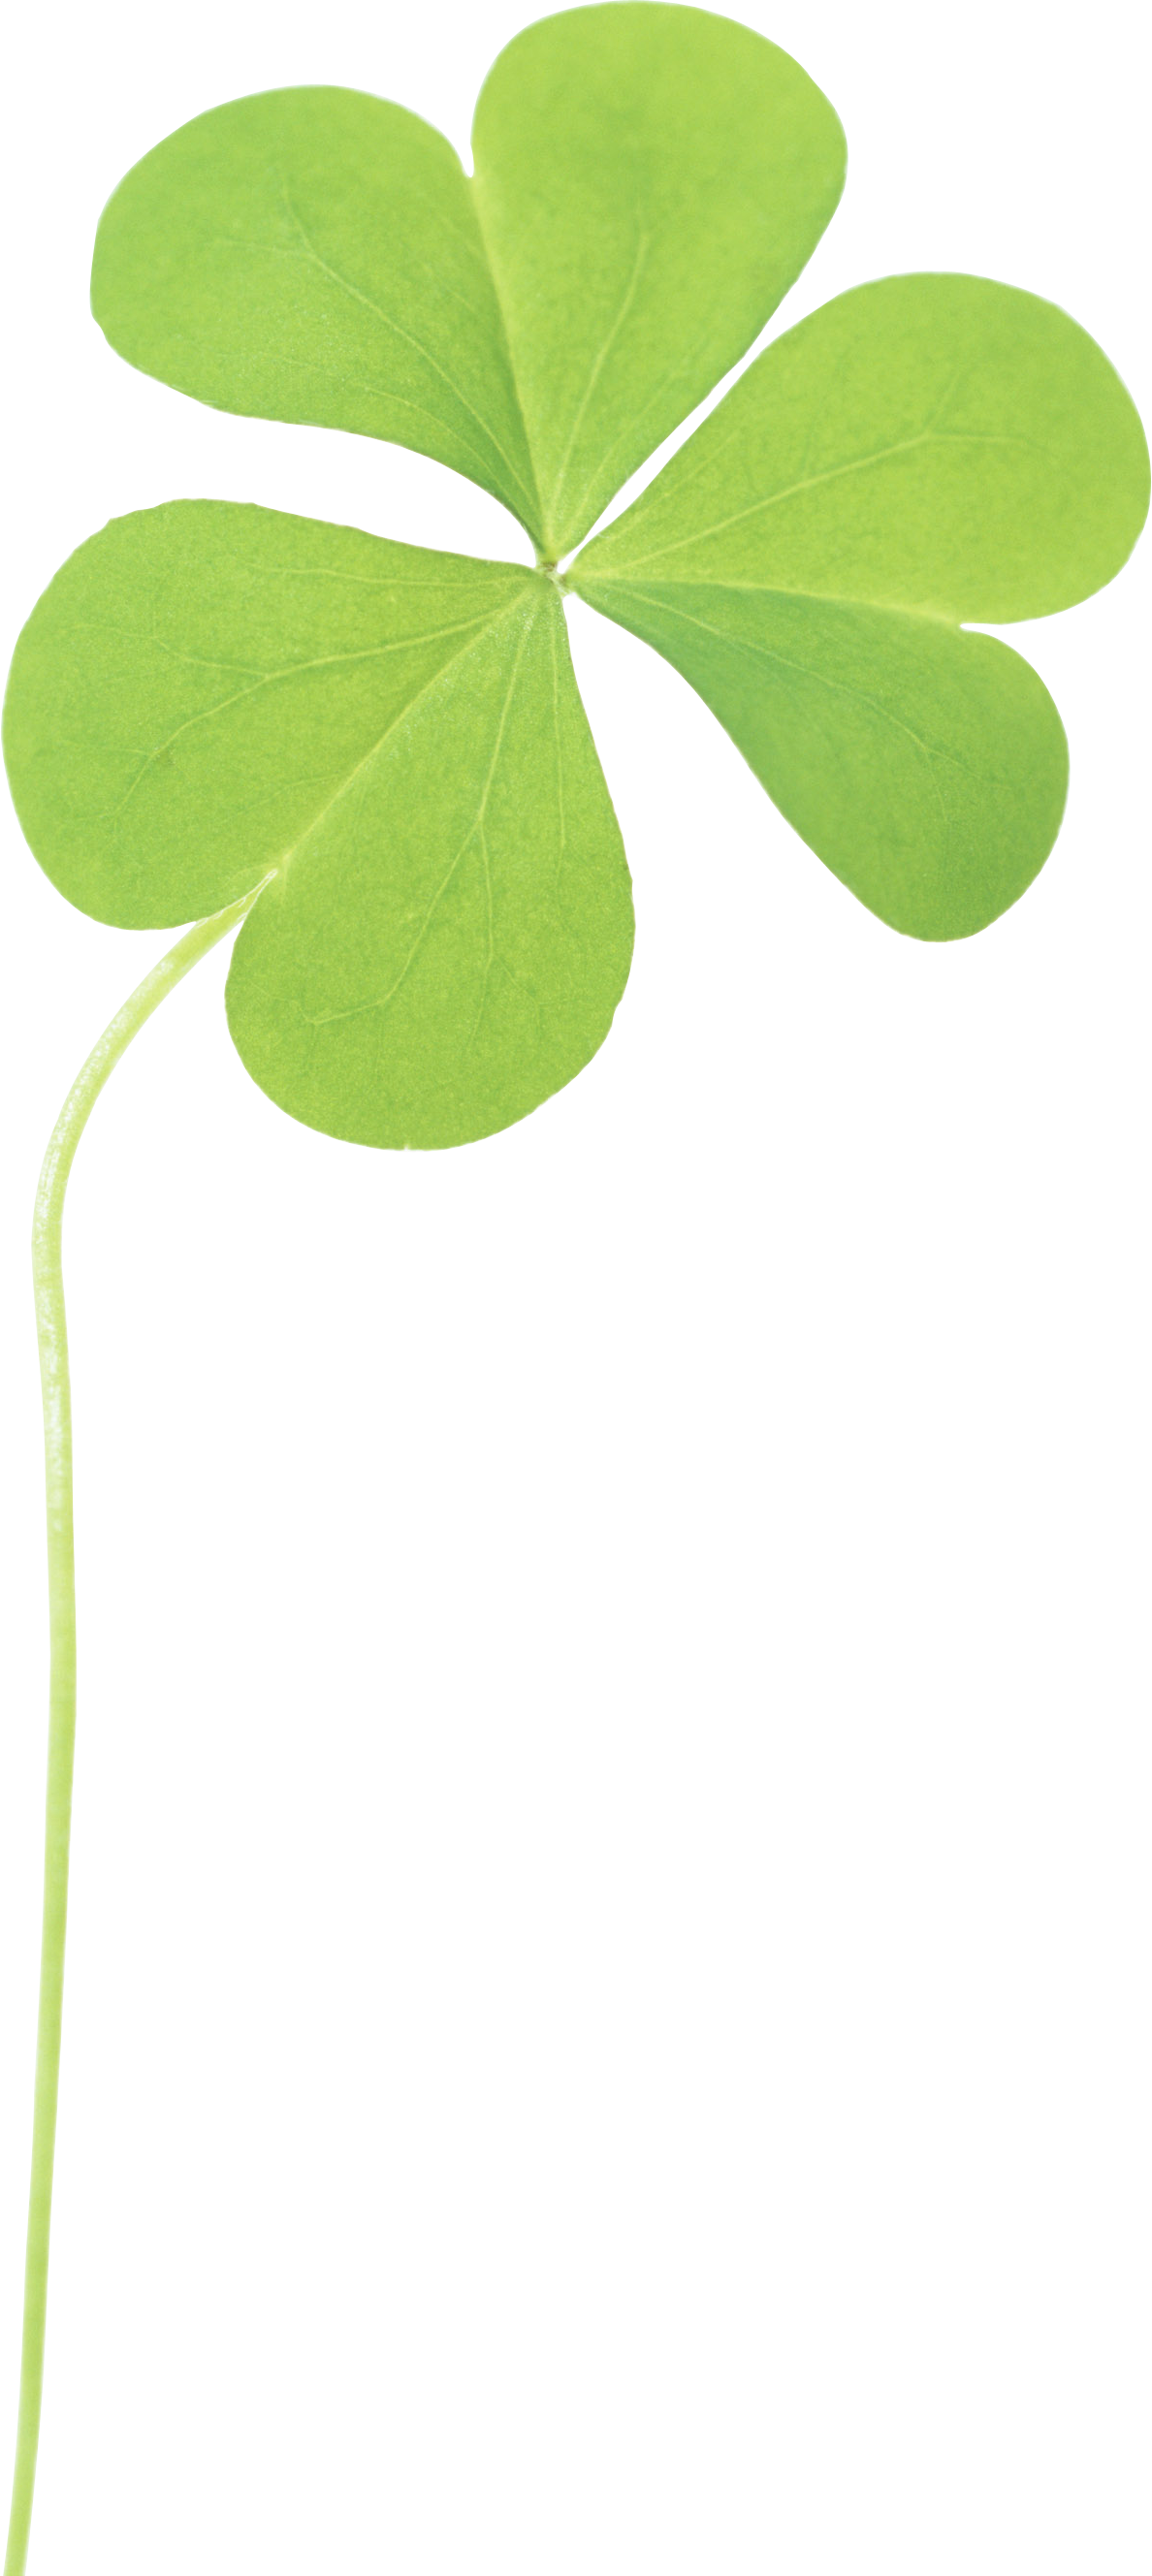 Clover png imahe